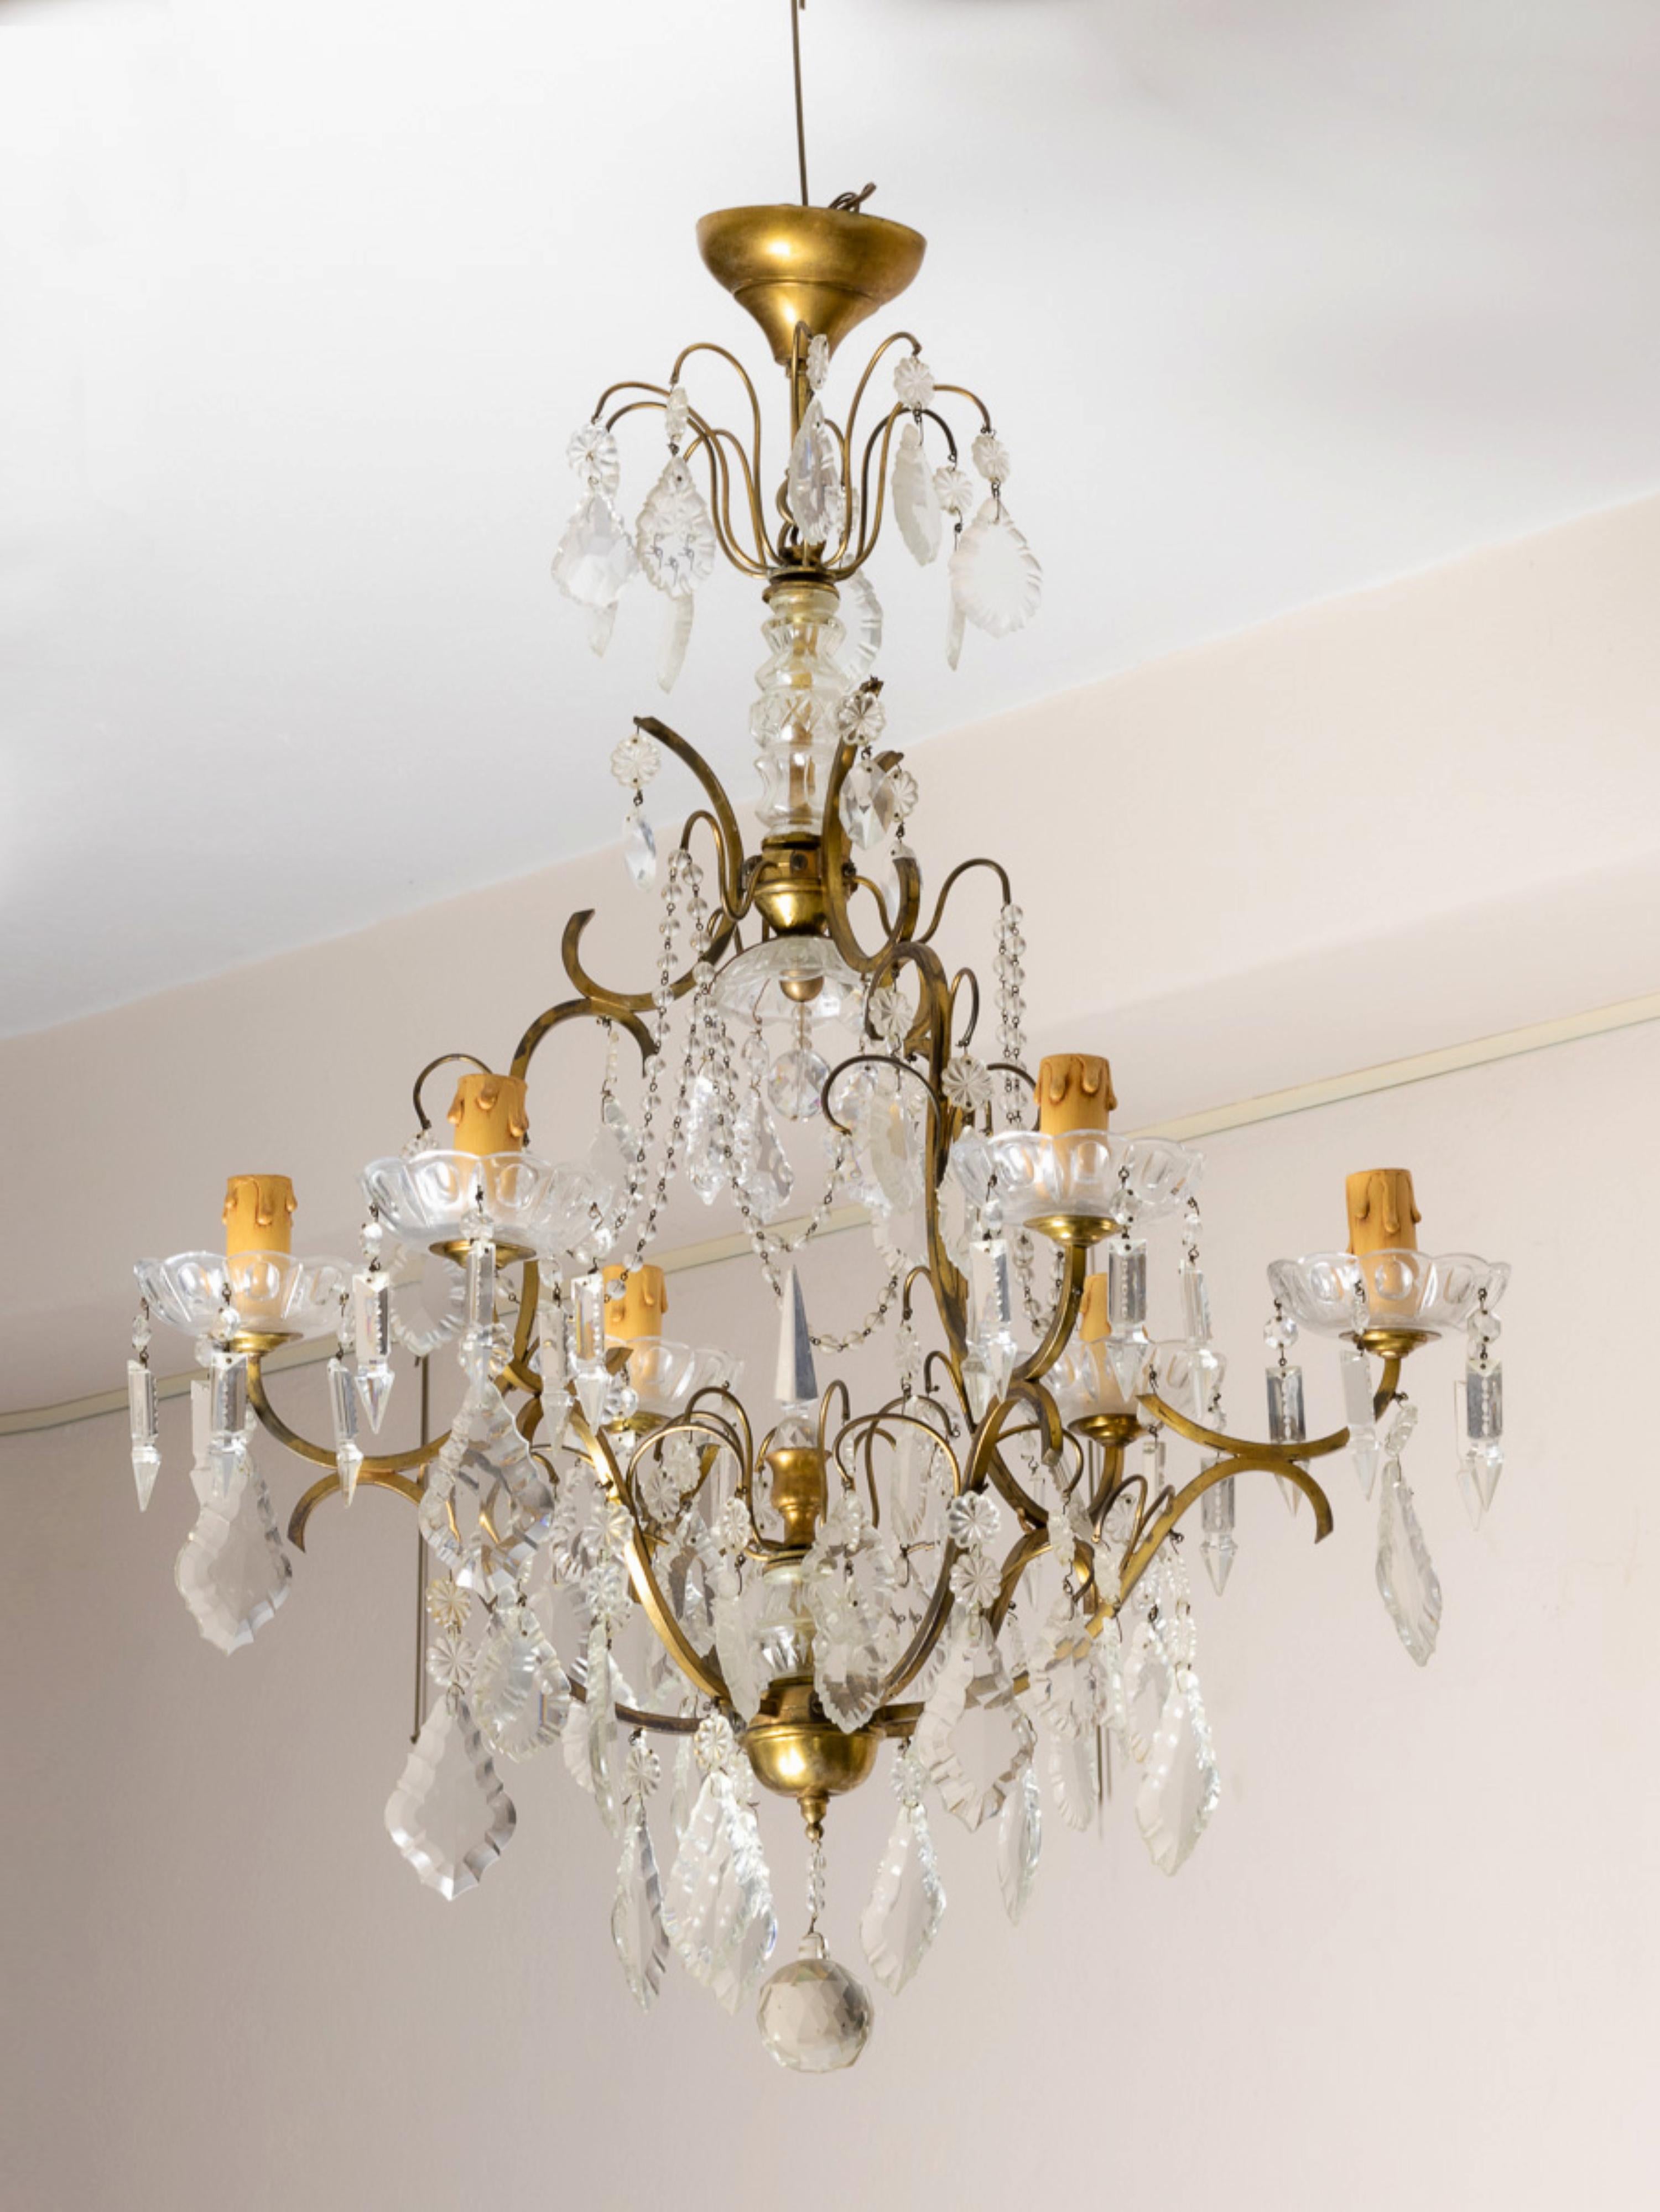 A french Louis XV Style bronze and crystal chandelier with various crystal and glass pendants and finials, six candlestick holders fully rewired and six light sockets.
A magnificent light bringer for any grand room.

The chandelier is currently